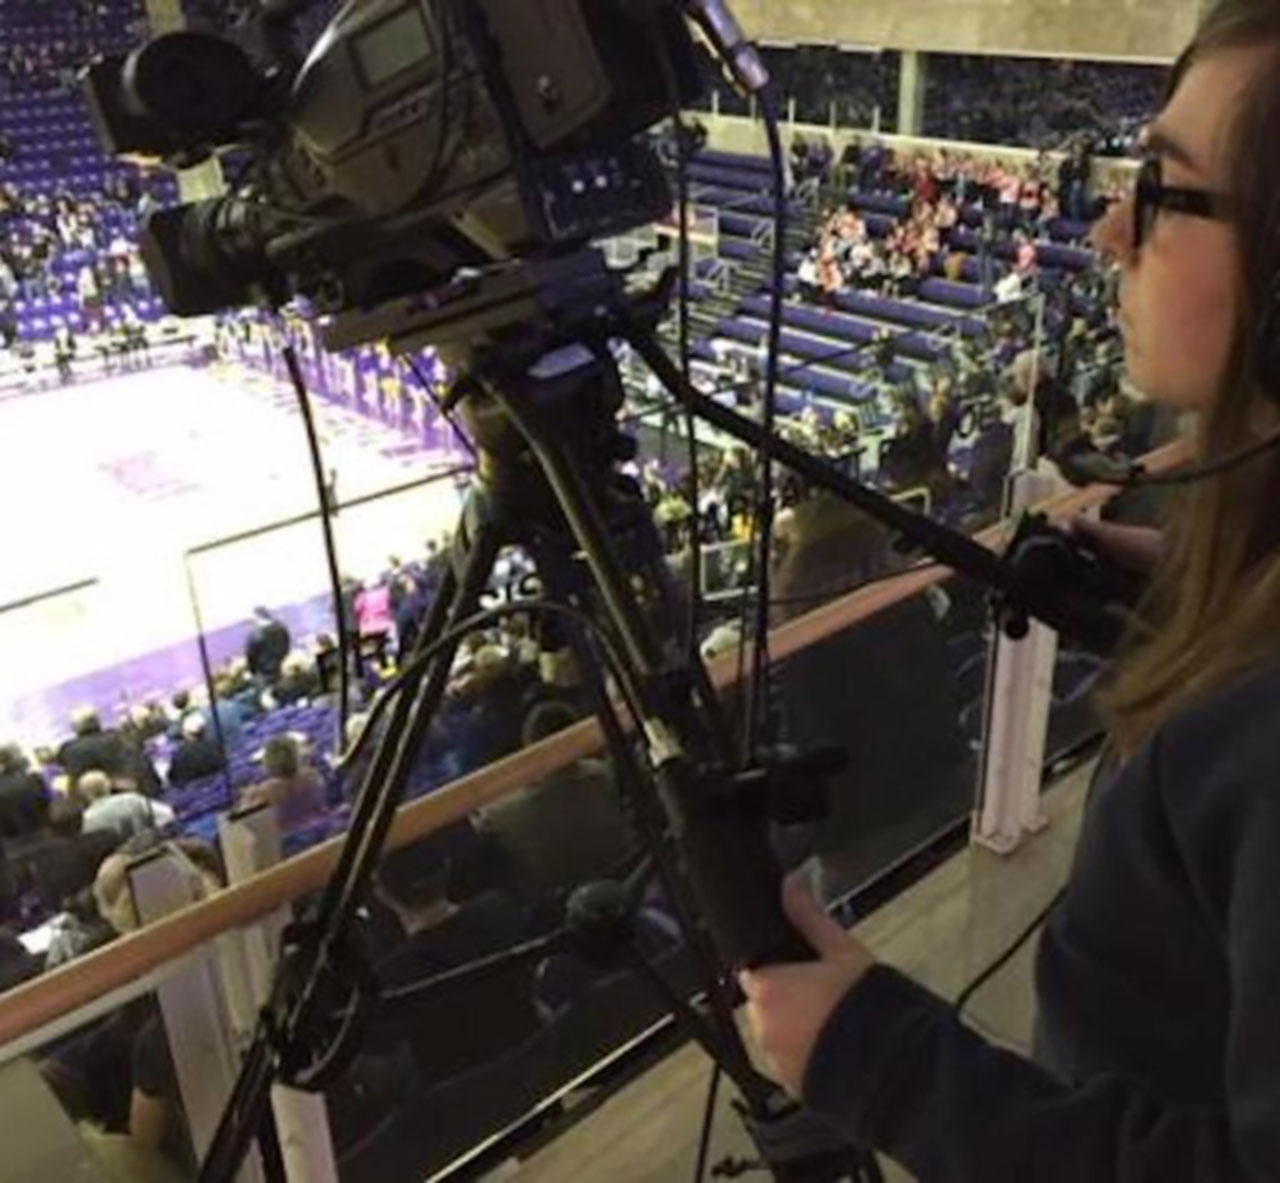 Student with a camera filming a basketball game.